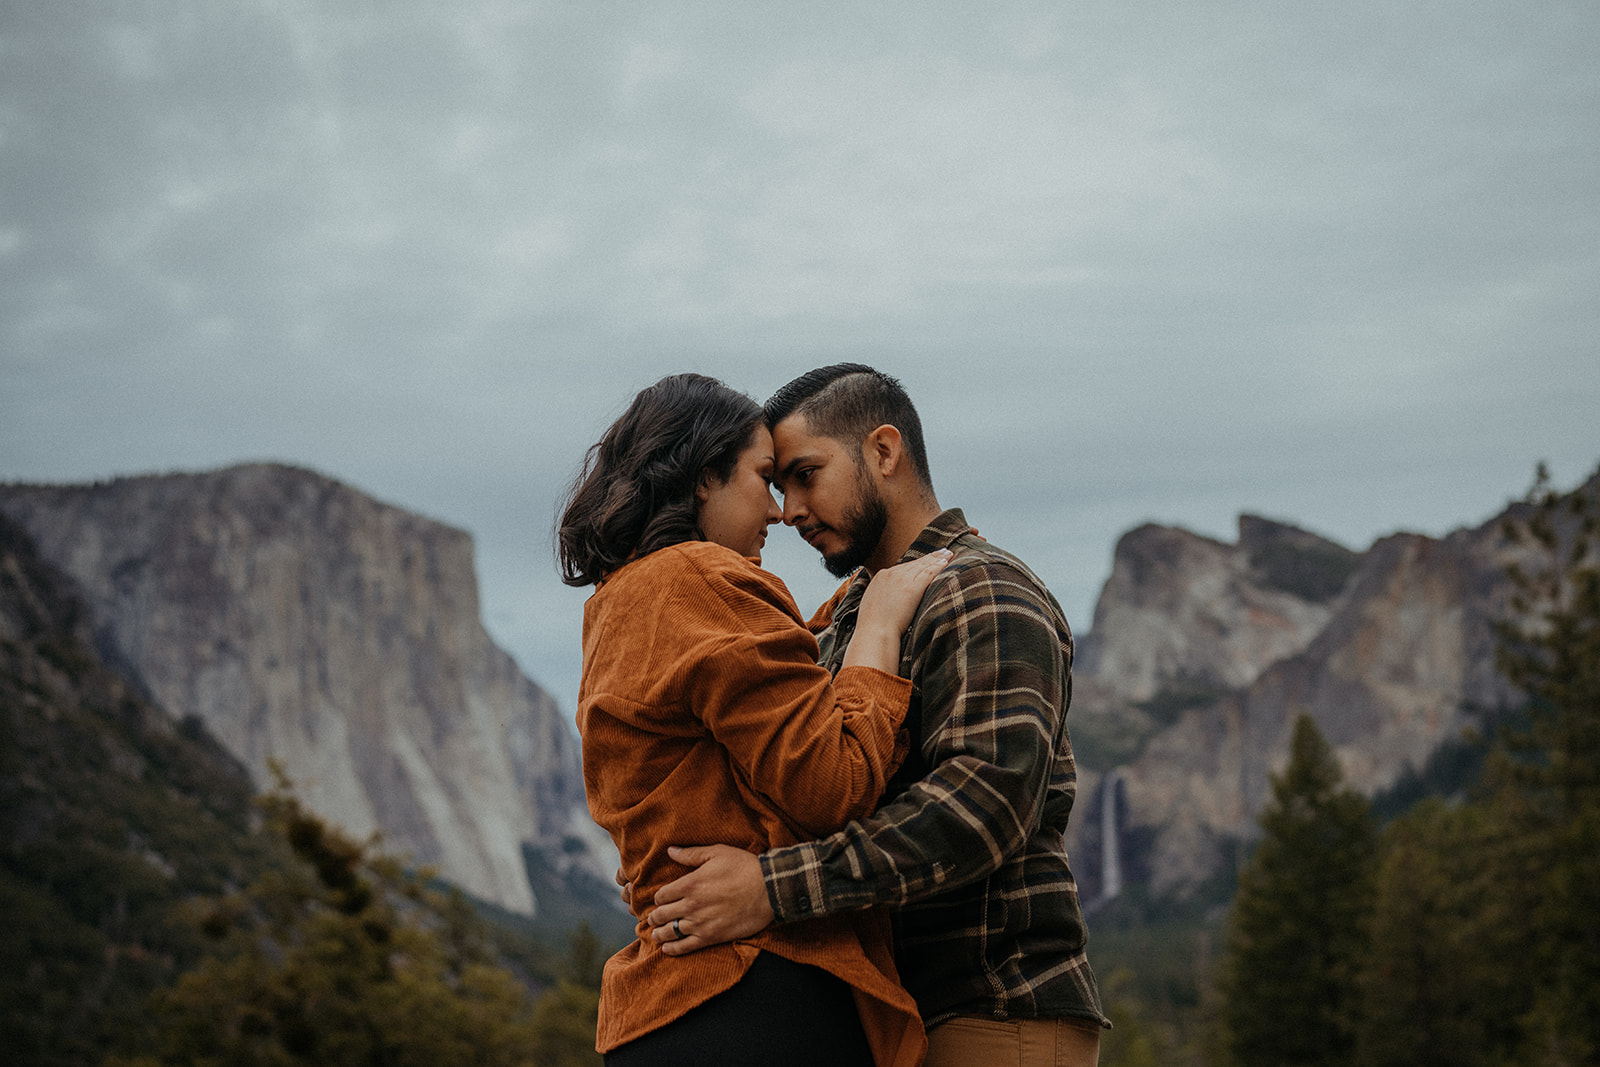 Adventurous couple embracing each other against the breathtaking backdrop of Yosemite National Park. The iconic Tunnel View frames the scene, showcasing majestic granite cliffs and towering trees on a gloomy yet atmospheric day.